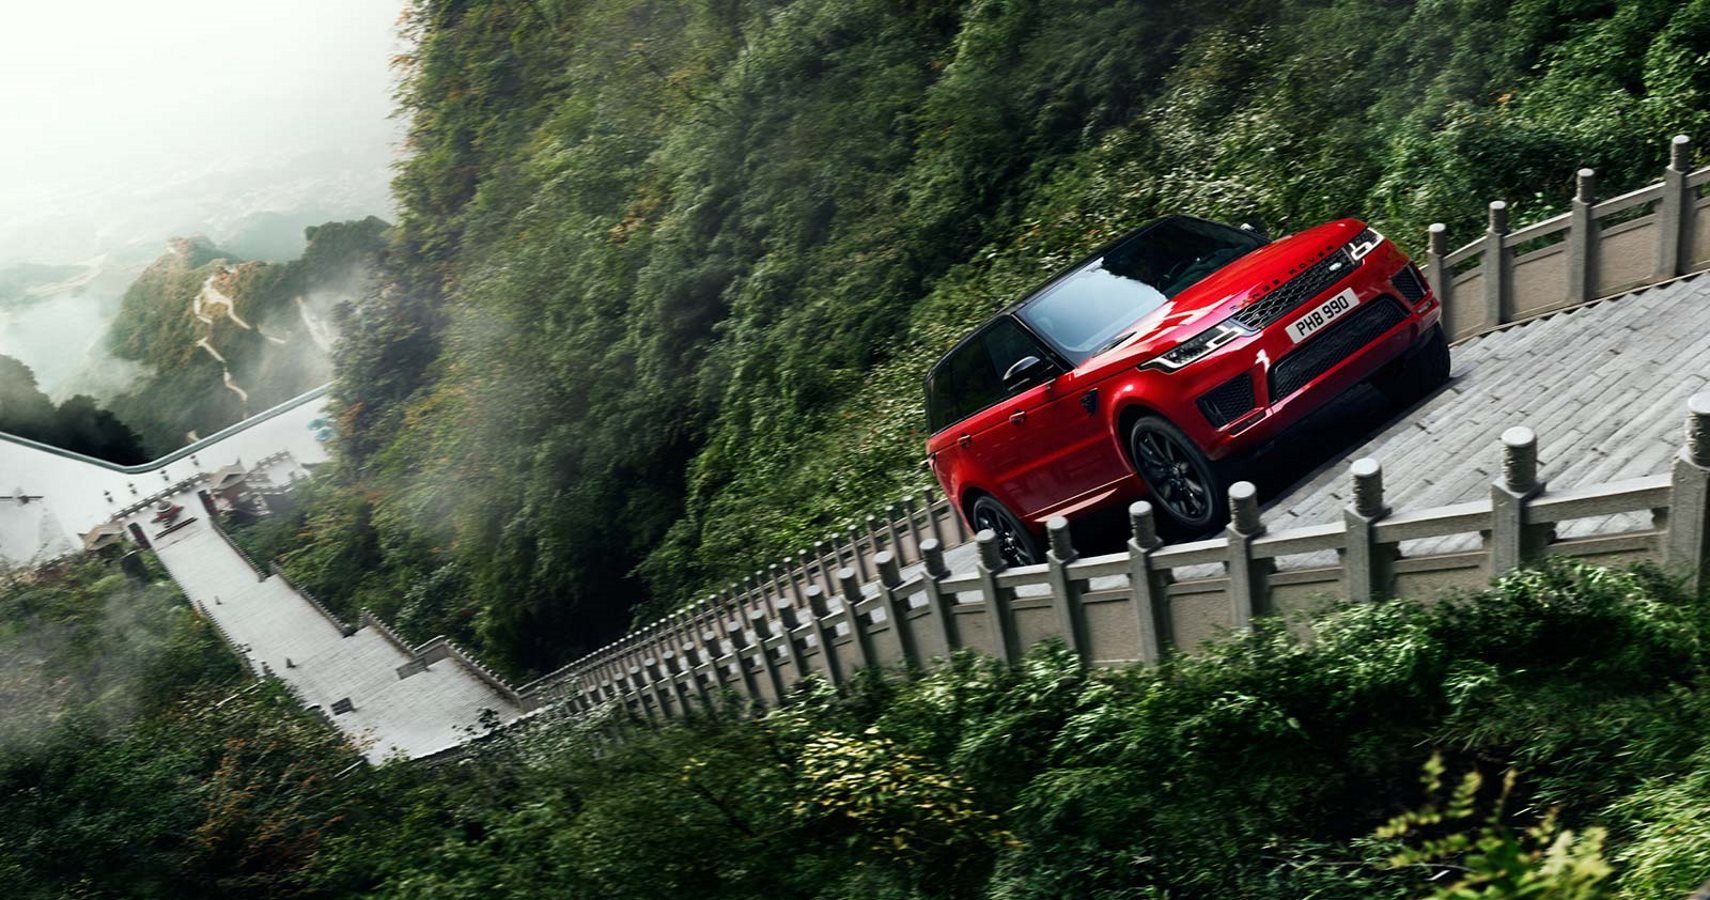 Range Rover Climbs 999 Steps Up Chinese Mountain